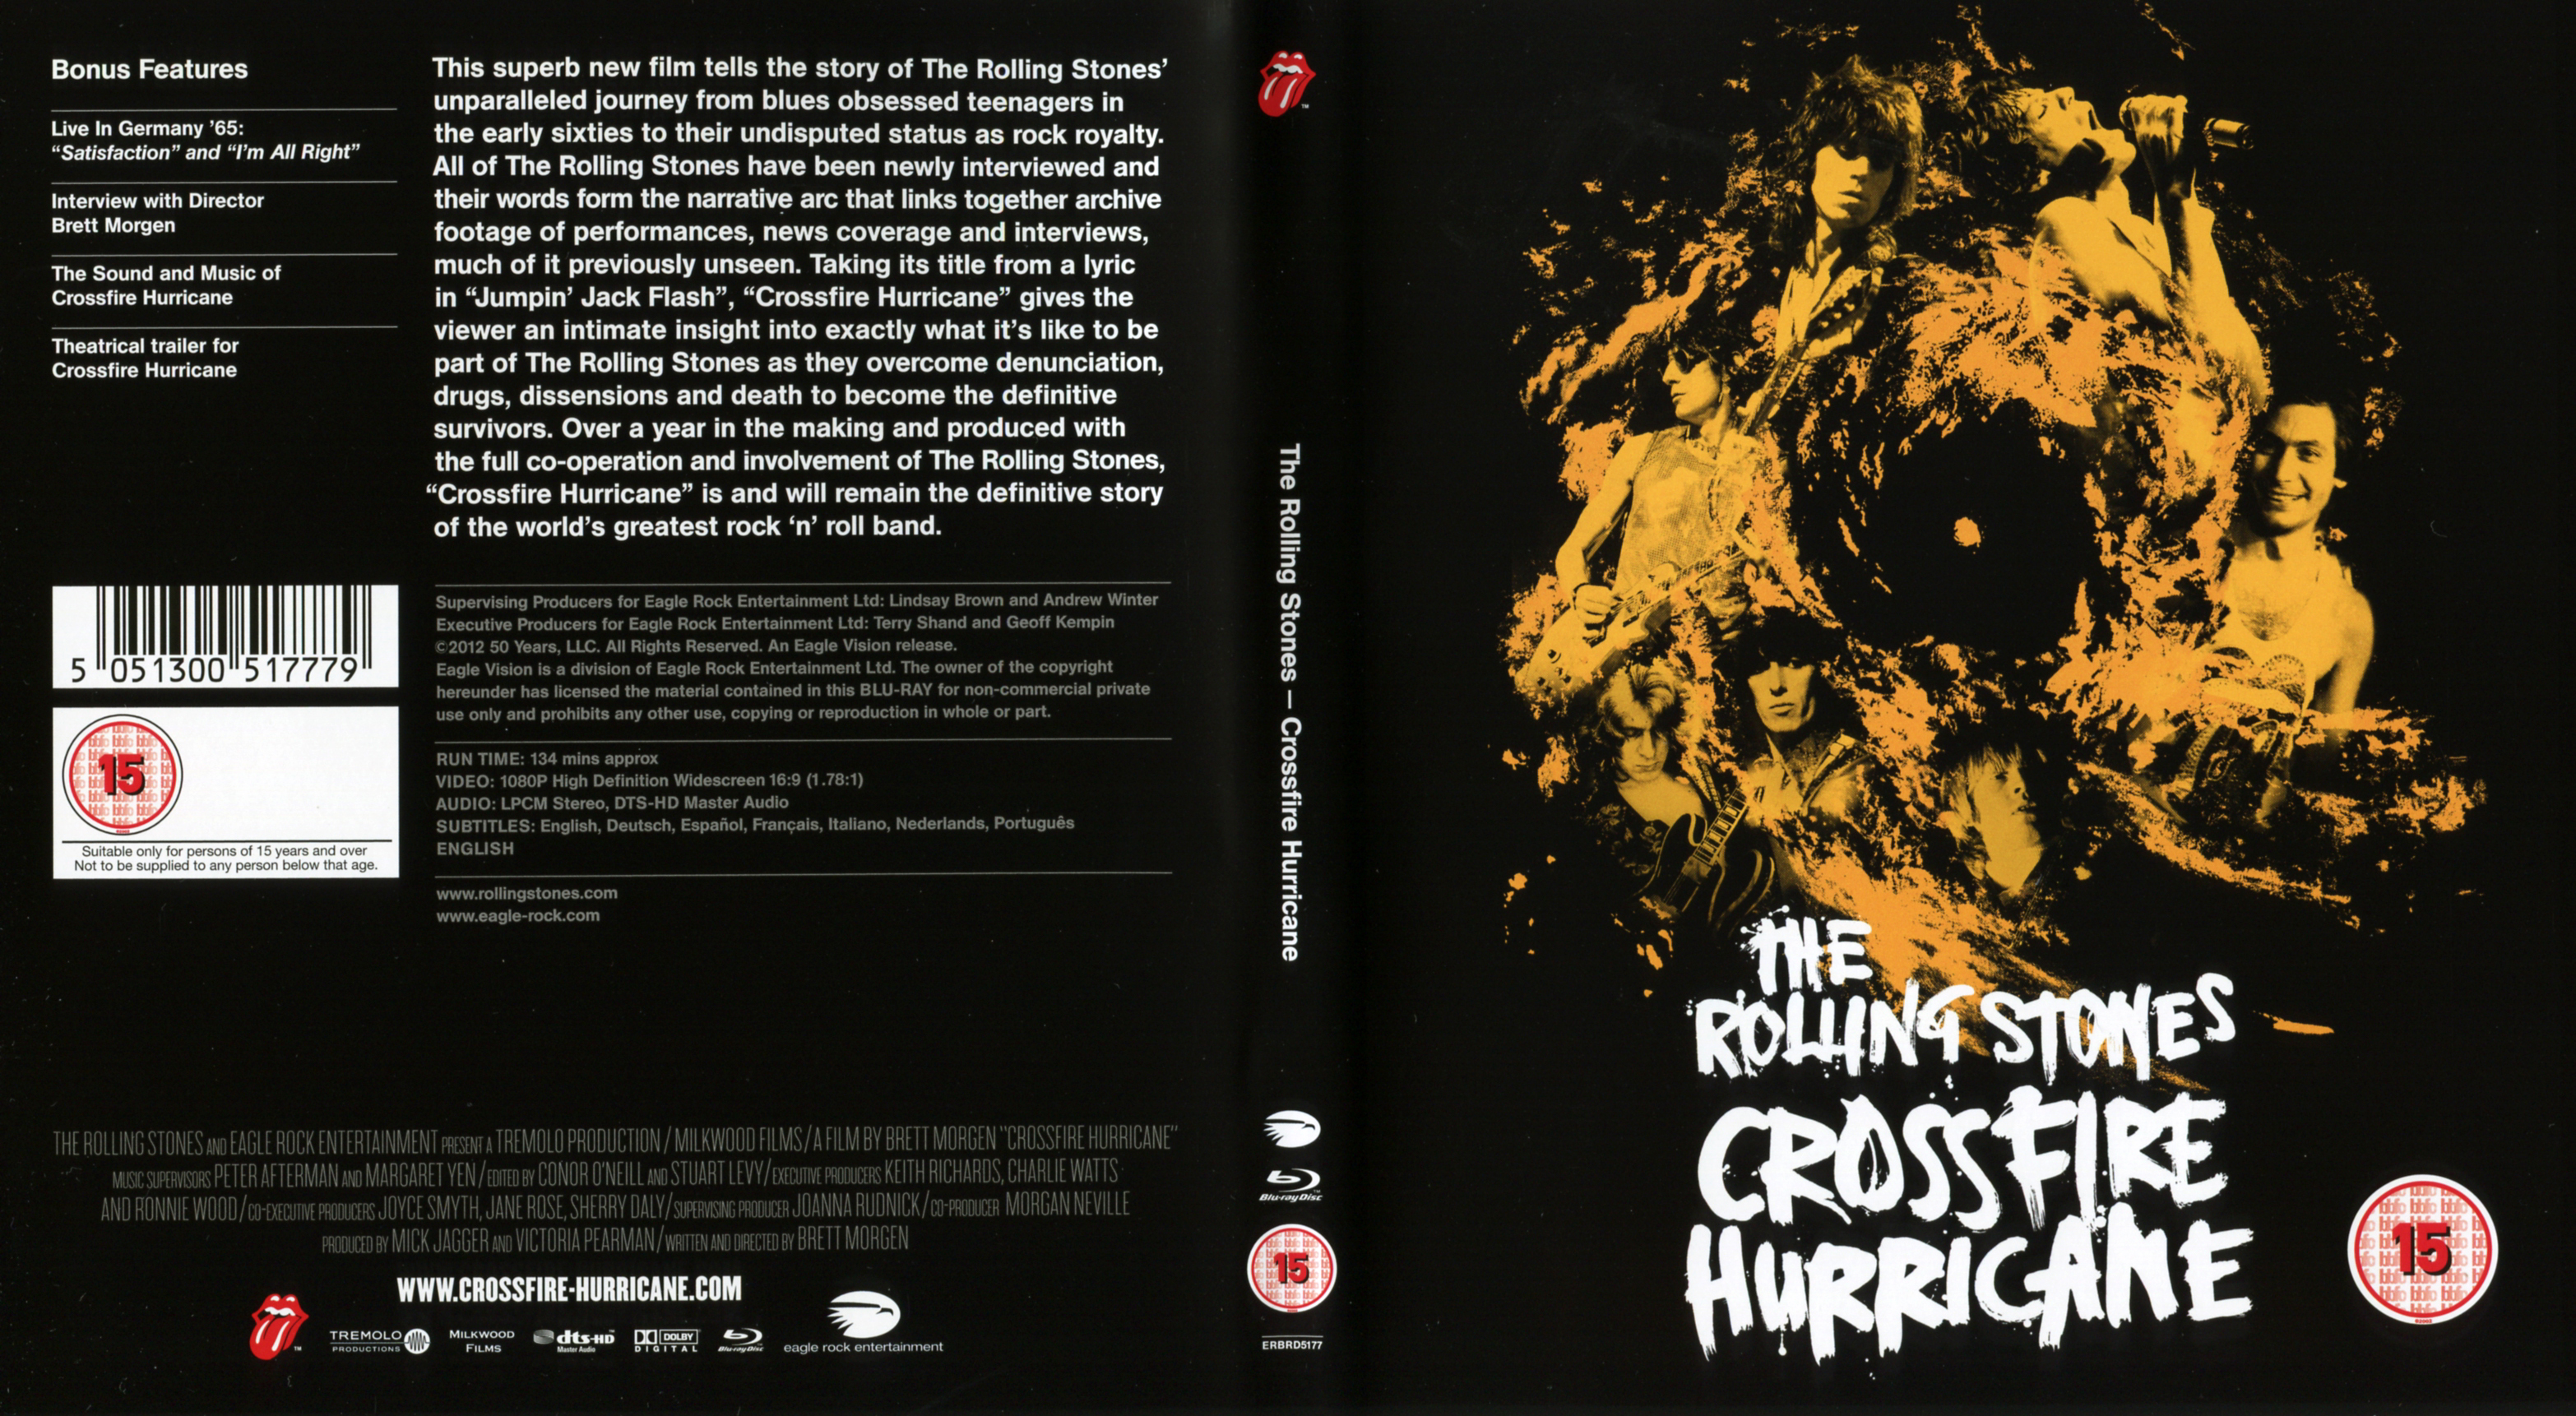 Jaquette DVD The Rolling Stones - CrossFire Hurricane